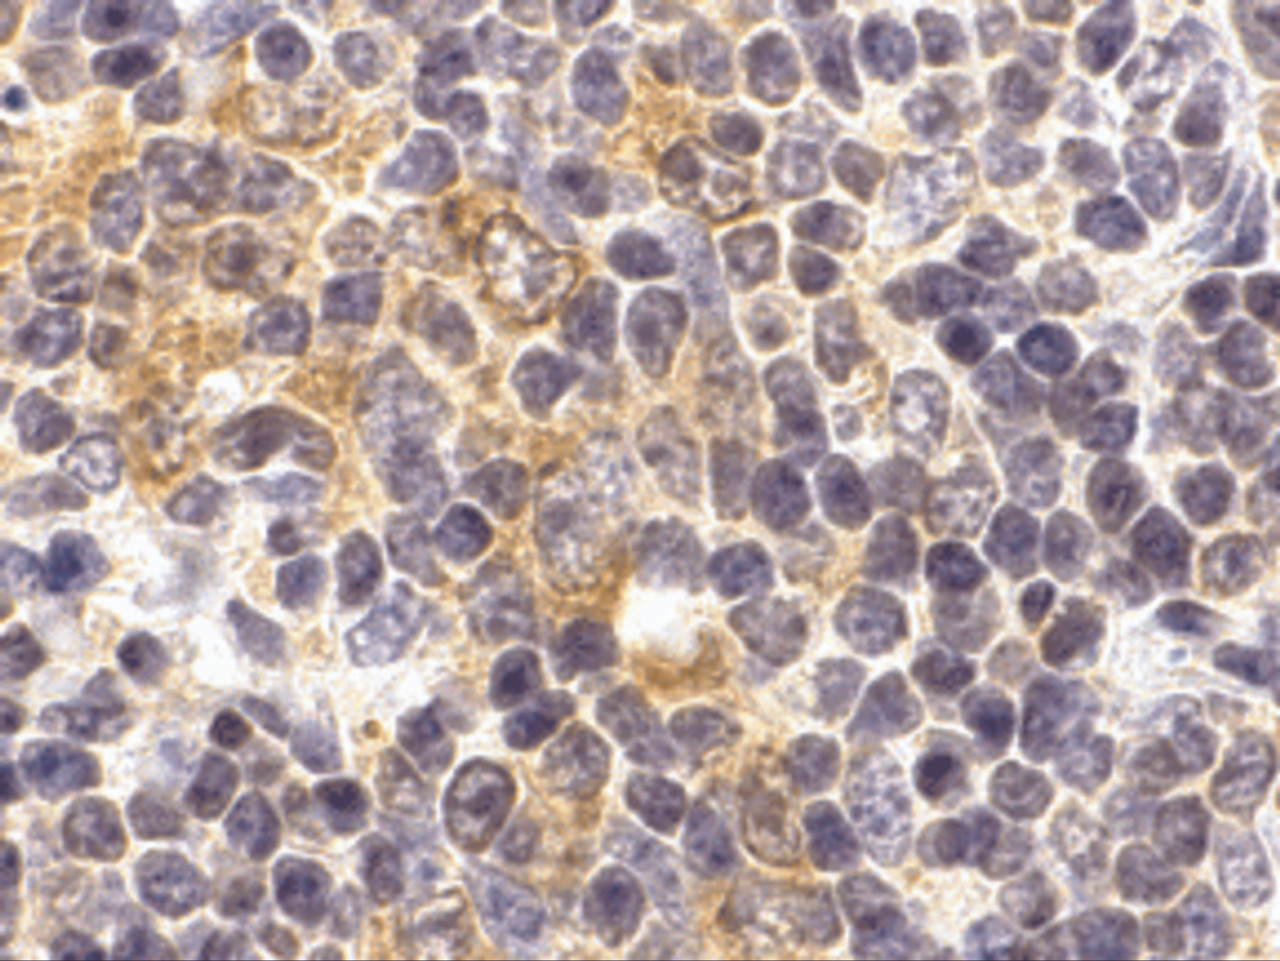 Immunohistochemistry of TLR9 in mouse spleen cells with TLR9 antibody at 2 ug/mL.